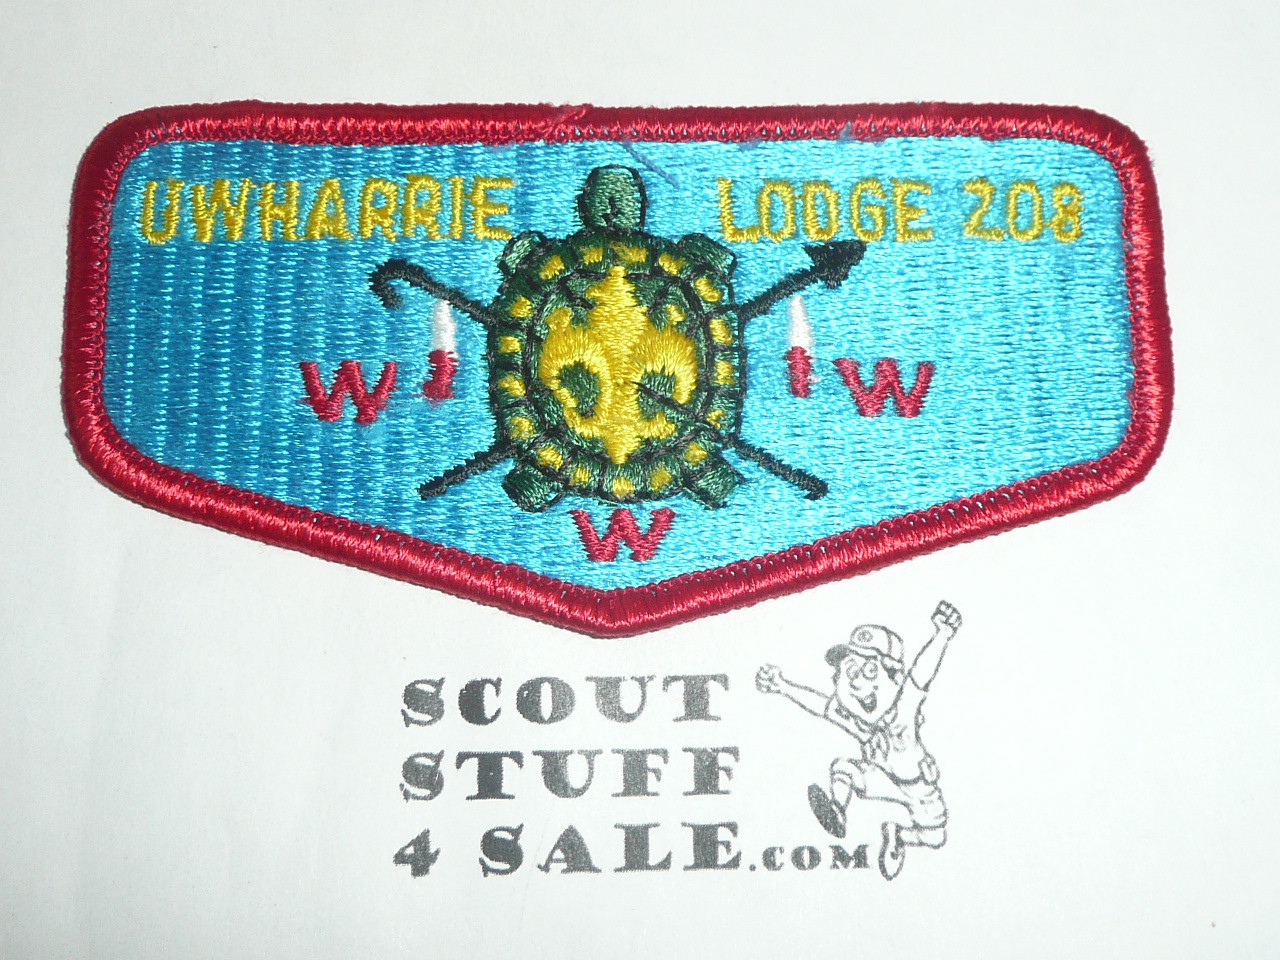 Order of the Arrow Lodge #208 Uwharrie s10 Flap Patch